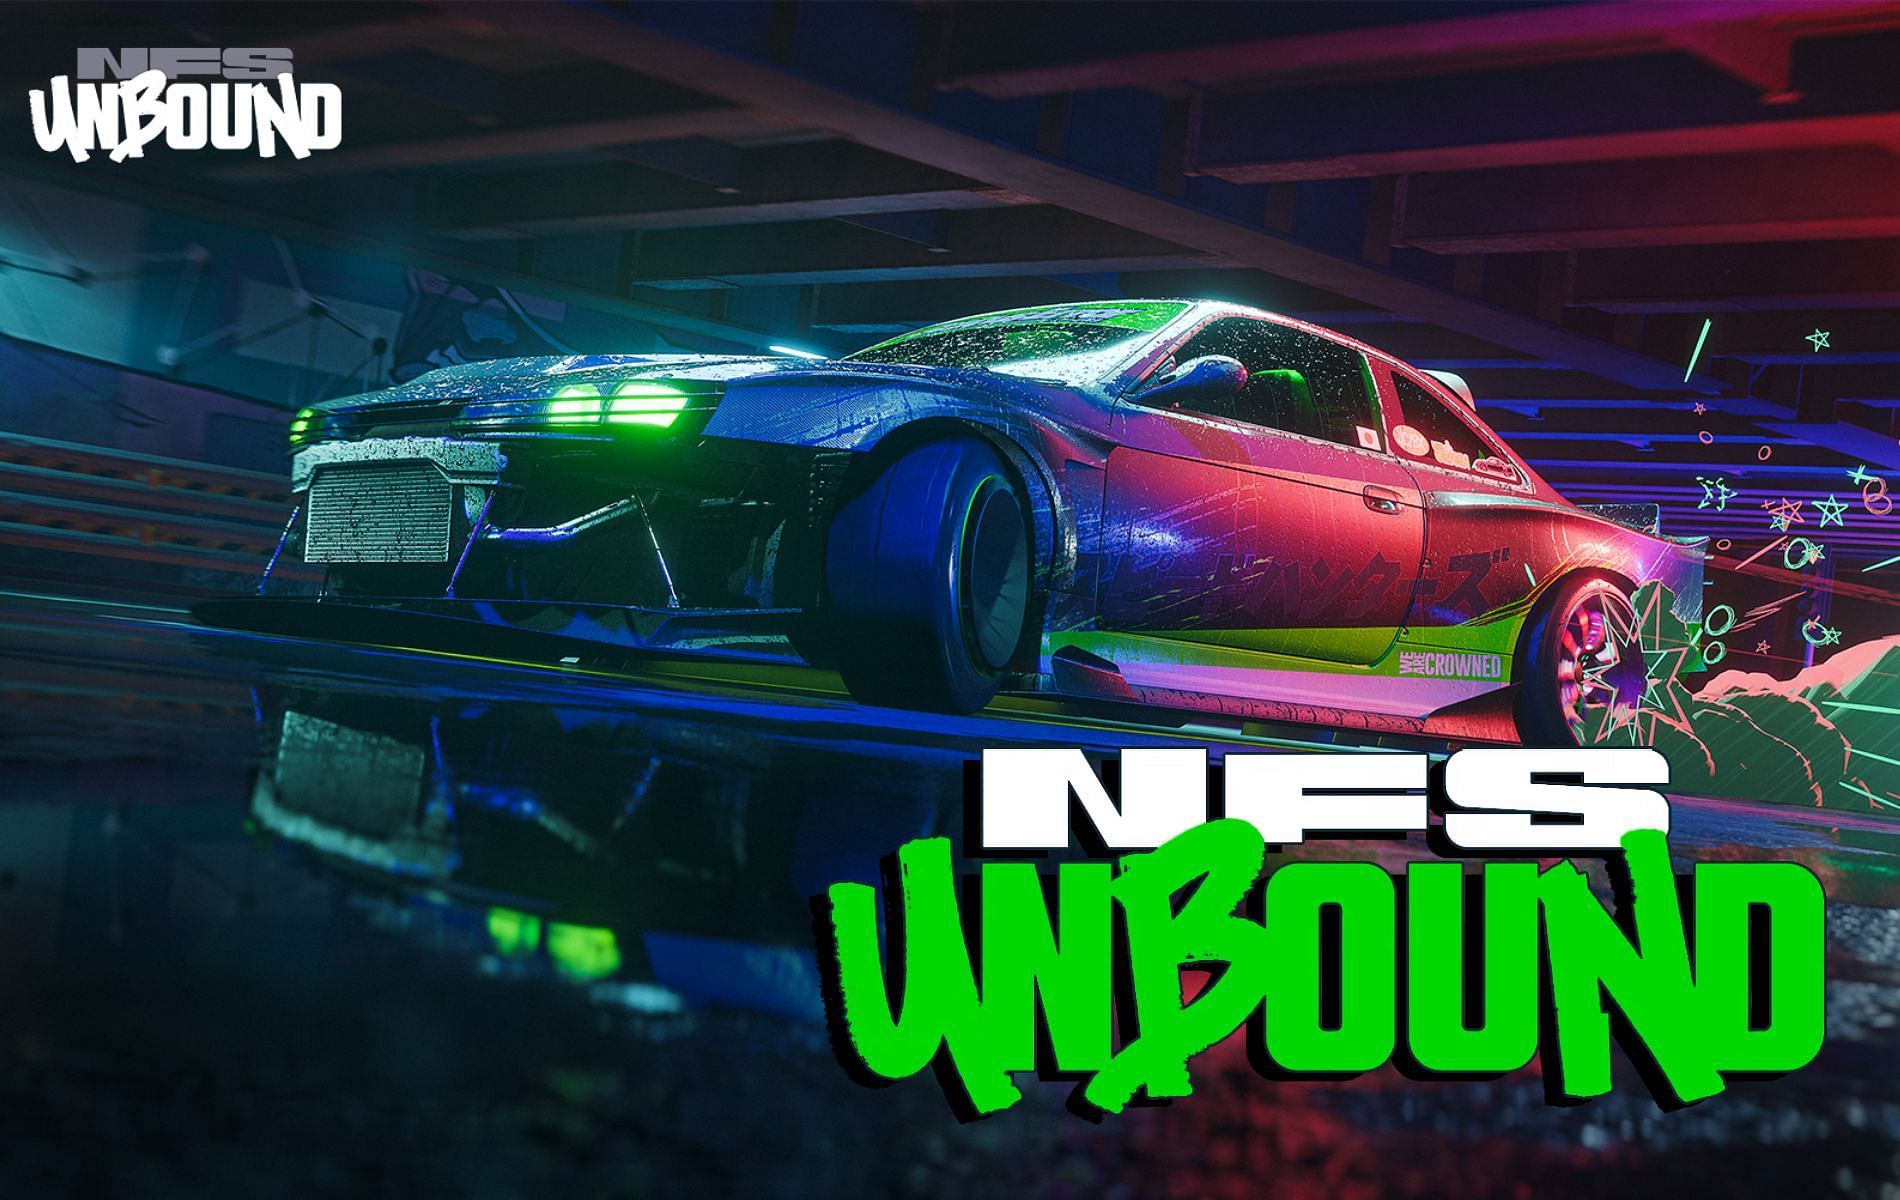 NFS Unbound launches this December (image via EA)